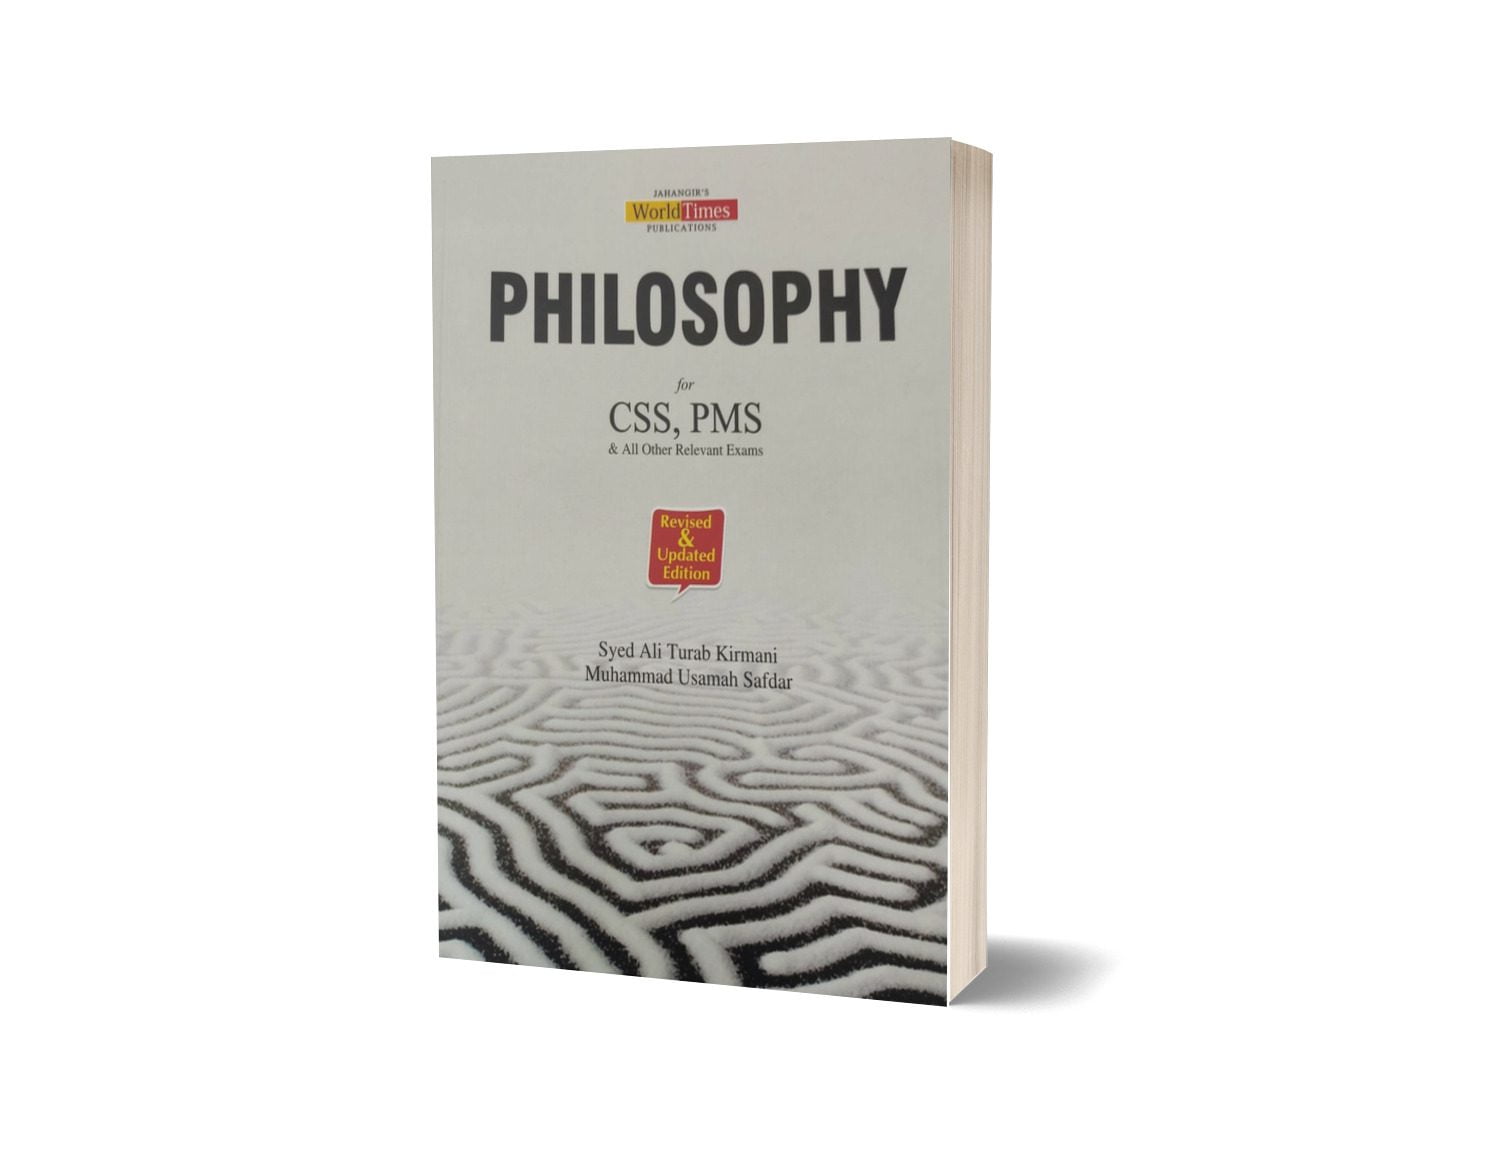 Philosophy For CSS PMS By Syed Turab Kirmani- JWT